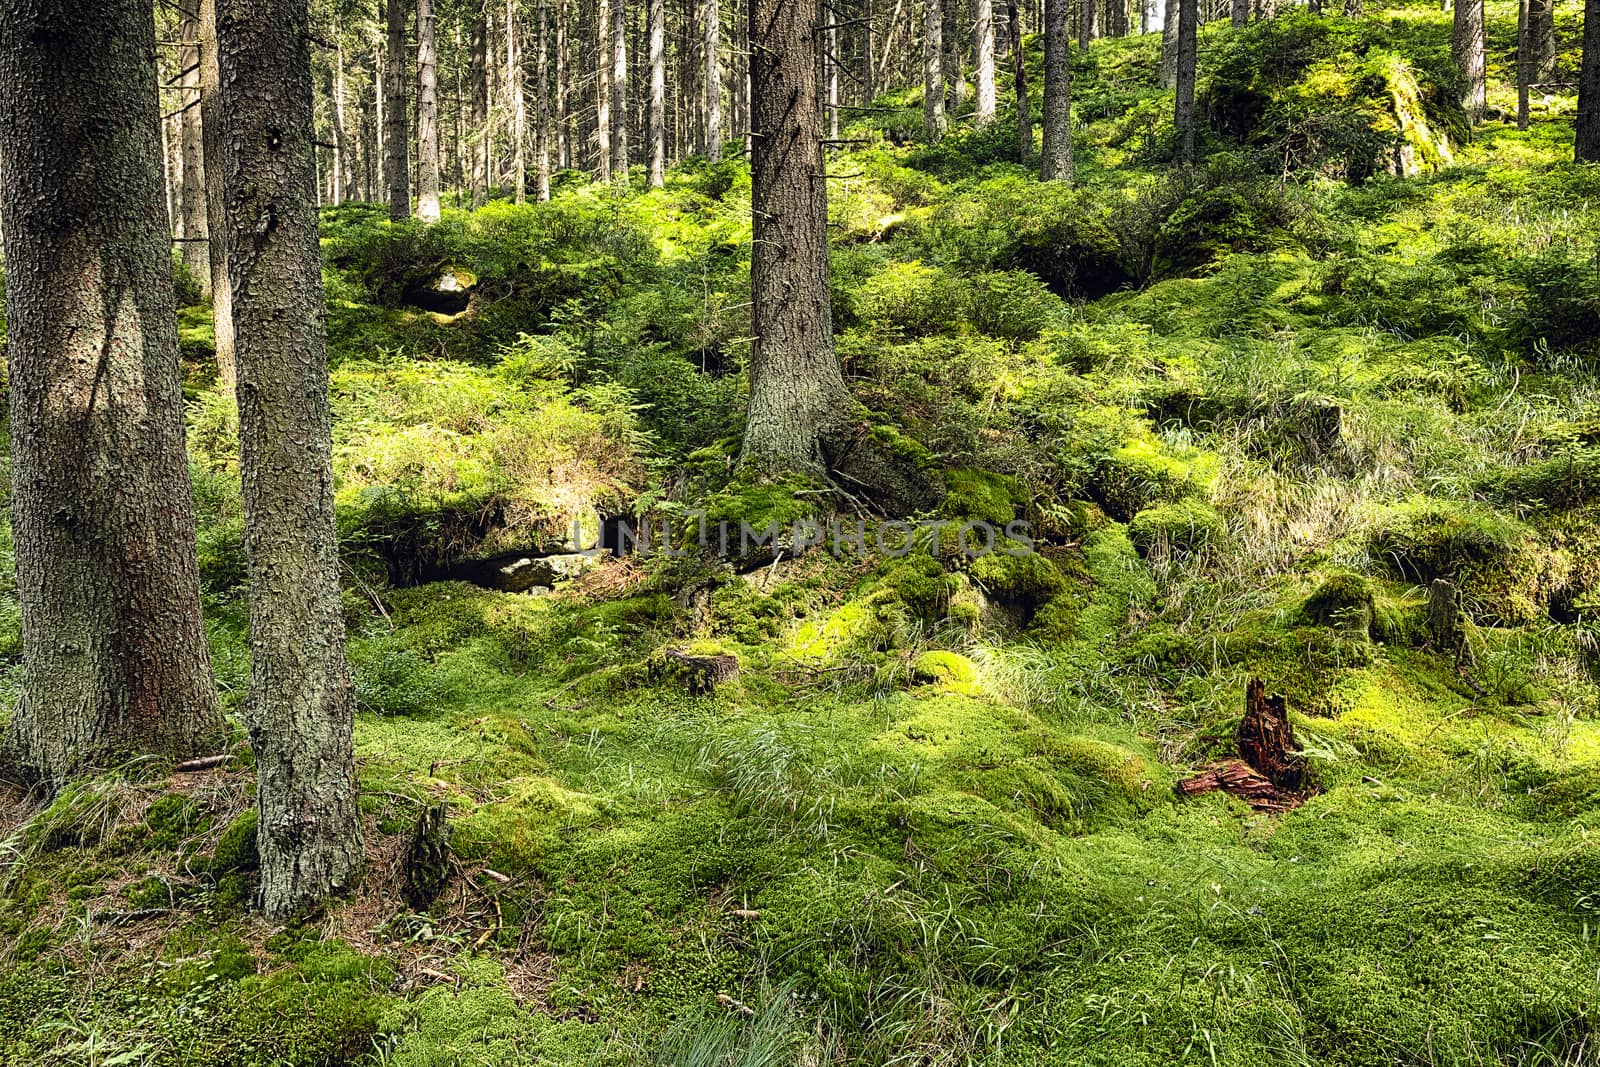 The primeval forest with mossed ground-HDR
